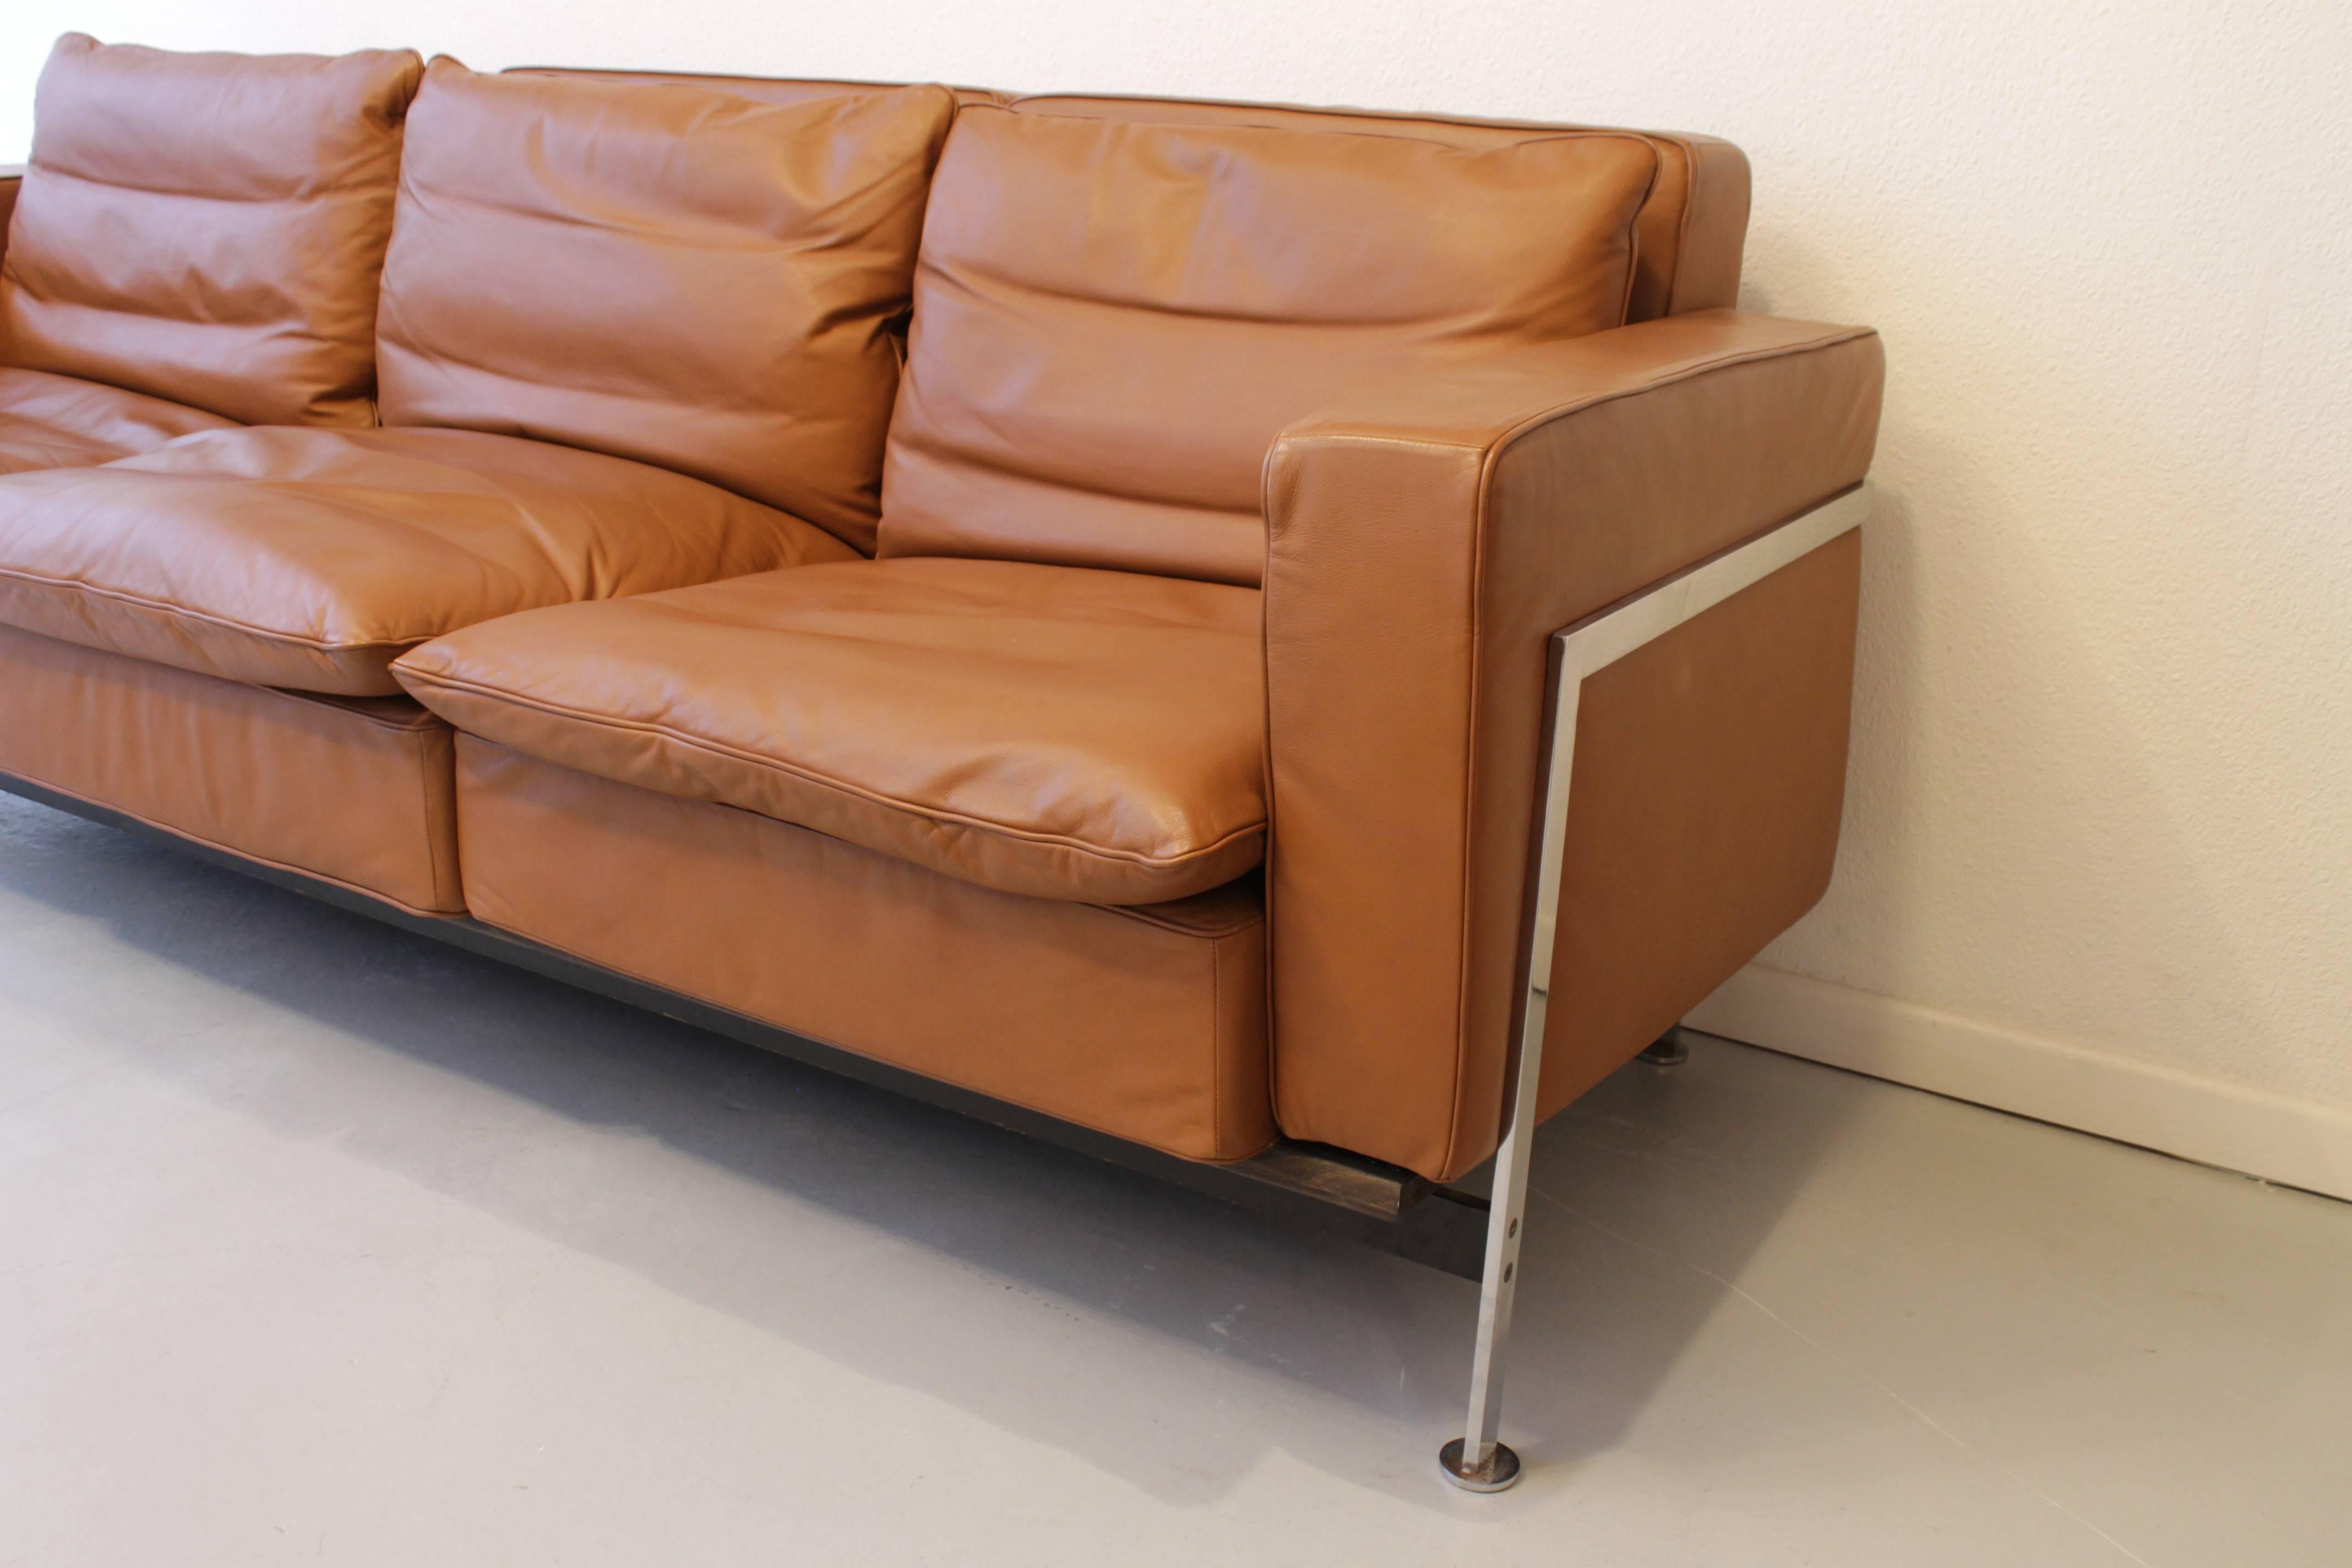 Cognac leather three-seat sofa by Robert & Trix Hausmann for De Sede, Switzerland, circa 1960s
Very good condition
Two matching armchairs available.
 